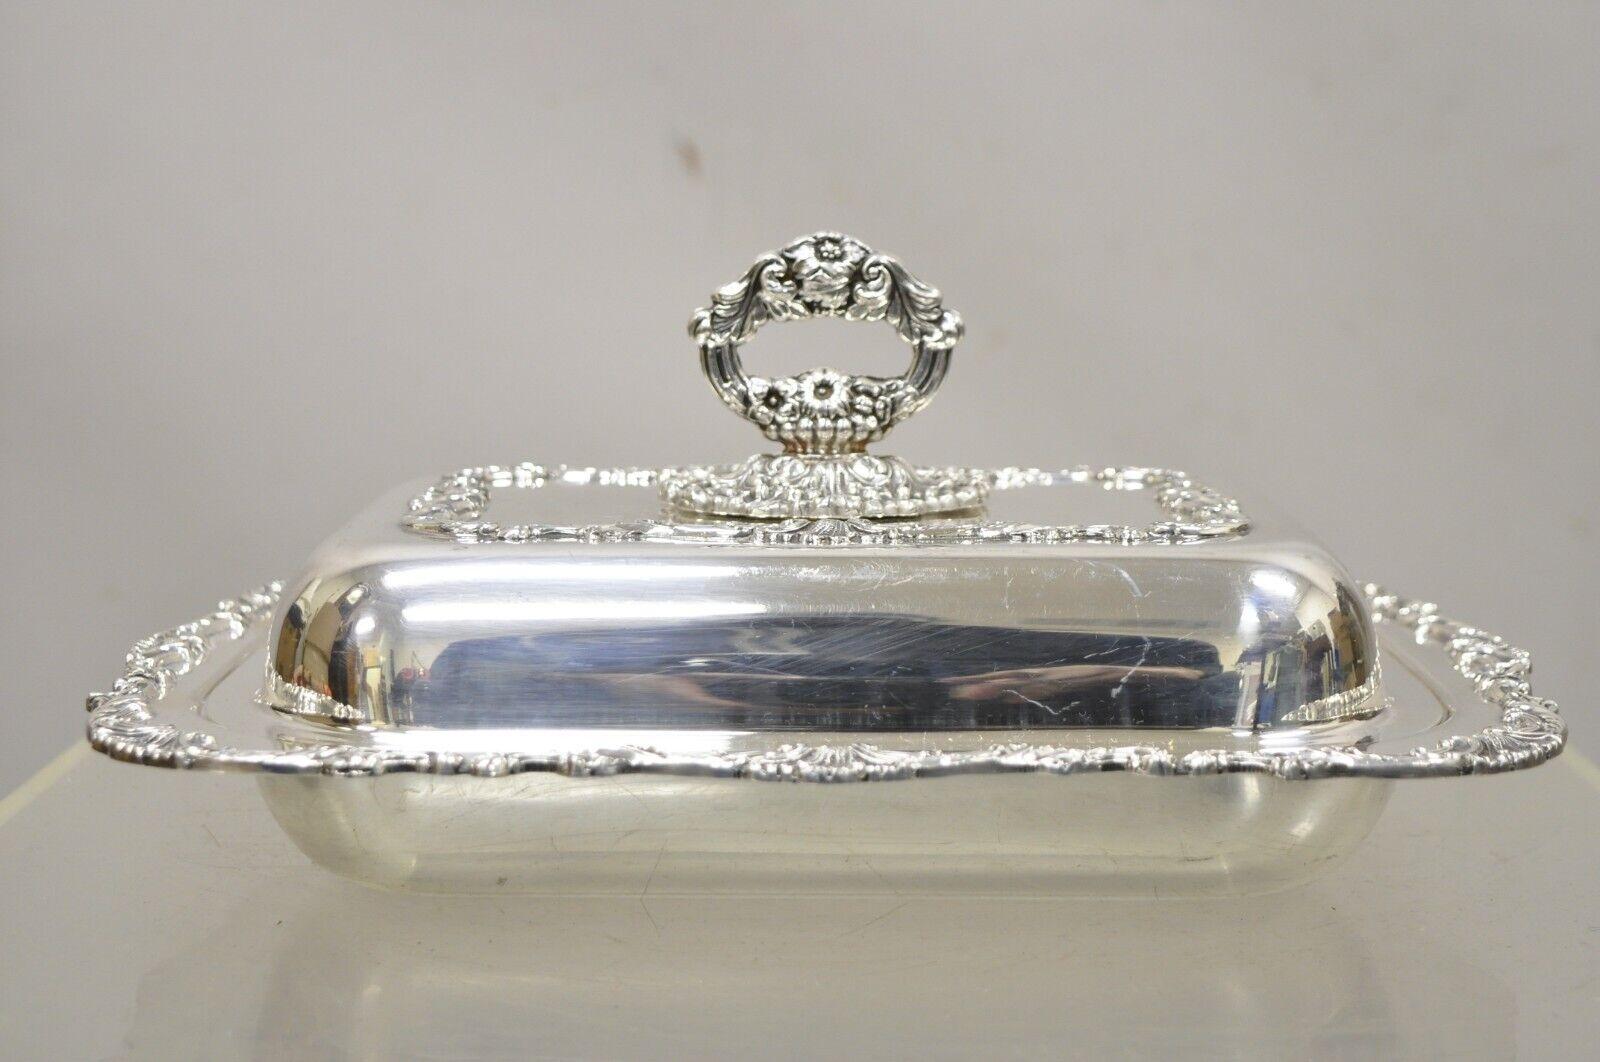 Vintage Community Ascot Silver Plated Victorian Style Lidded Serving Platter. Item features an ornate removable handle, divider to interior, original stamp, very nice vintage item, quality American craftsmanship. Circa Mid 20th Century.